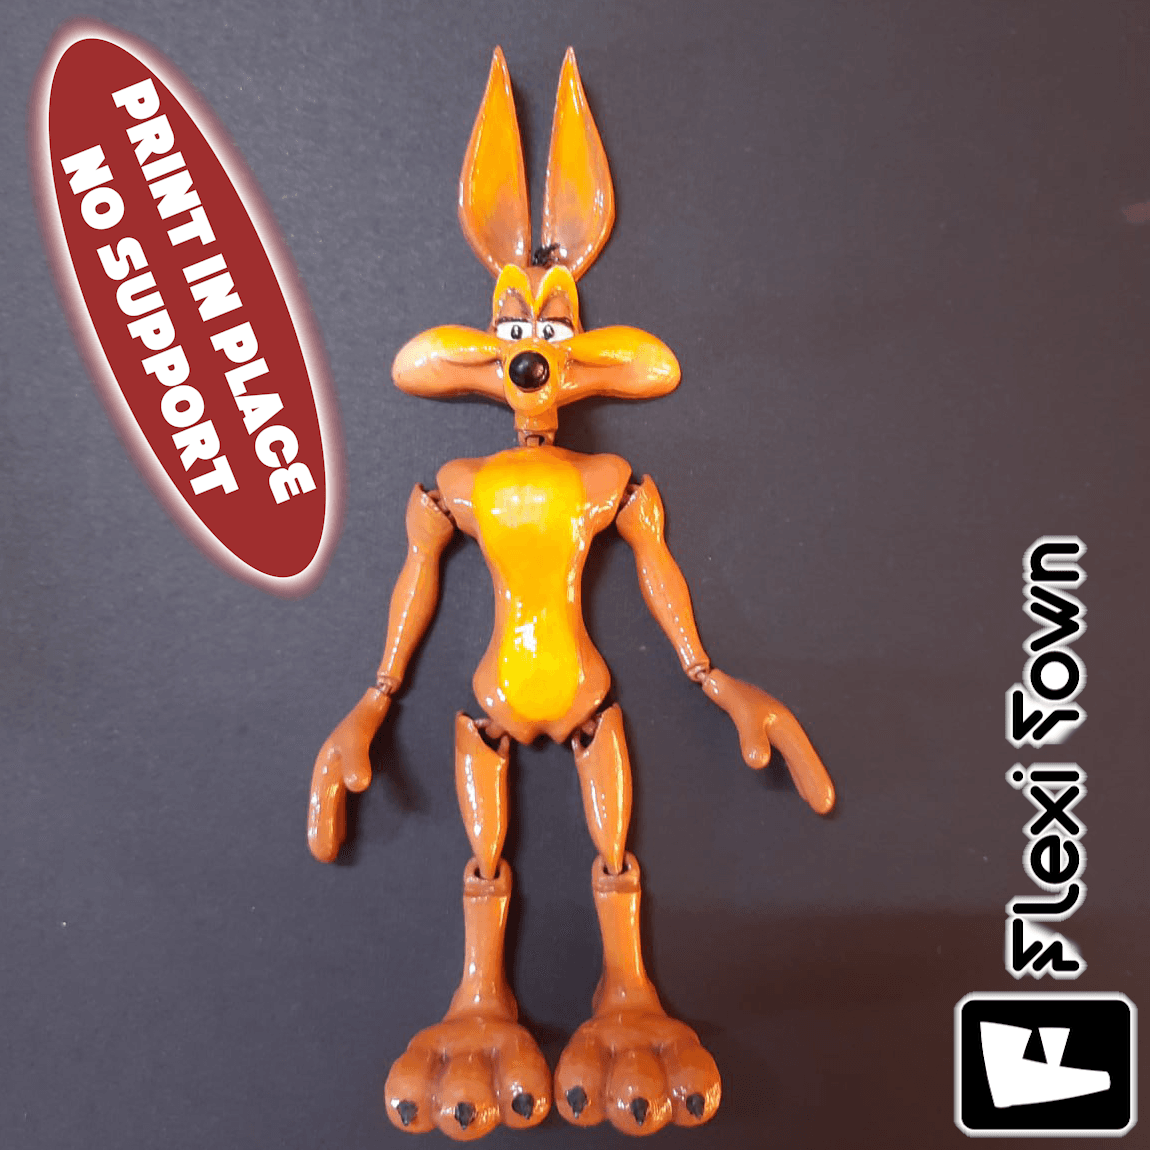 Flexi Print-in-Place Wile E. Coyote 3d model